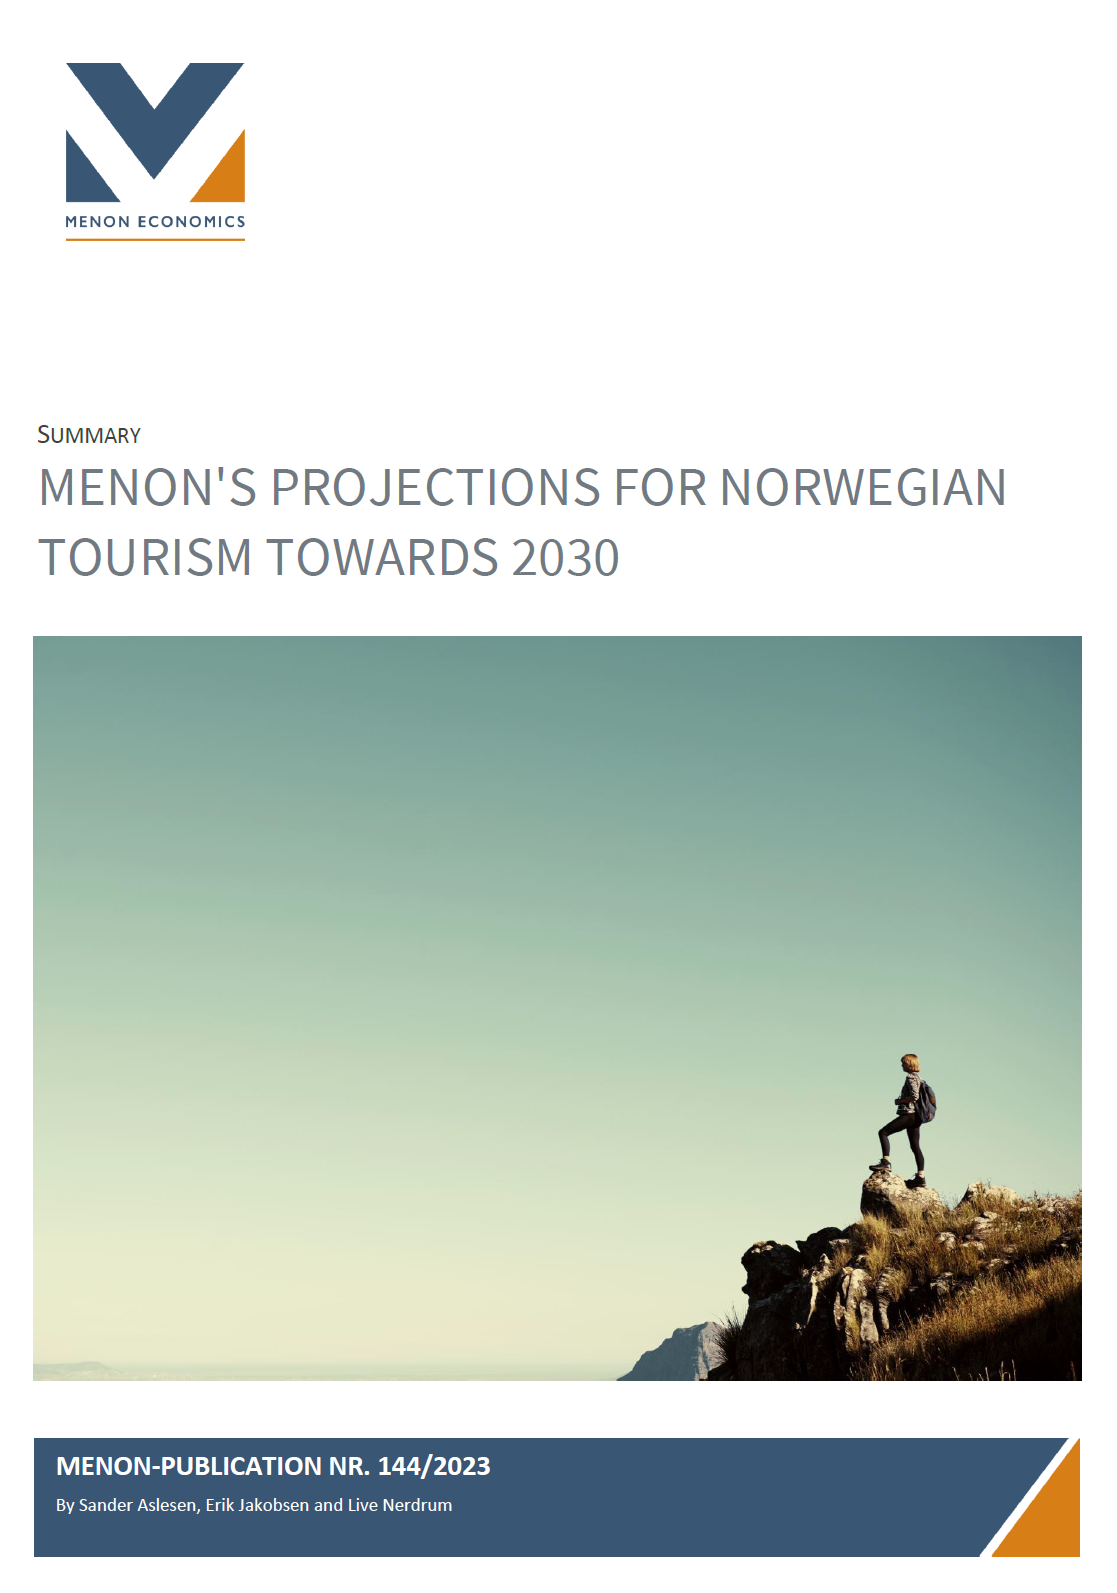 Menon’s projections for Norwegian tourism towards 2030